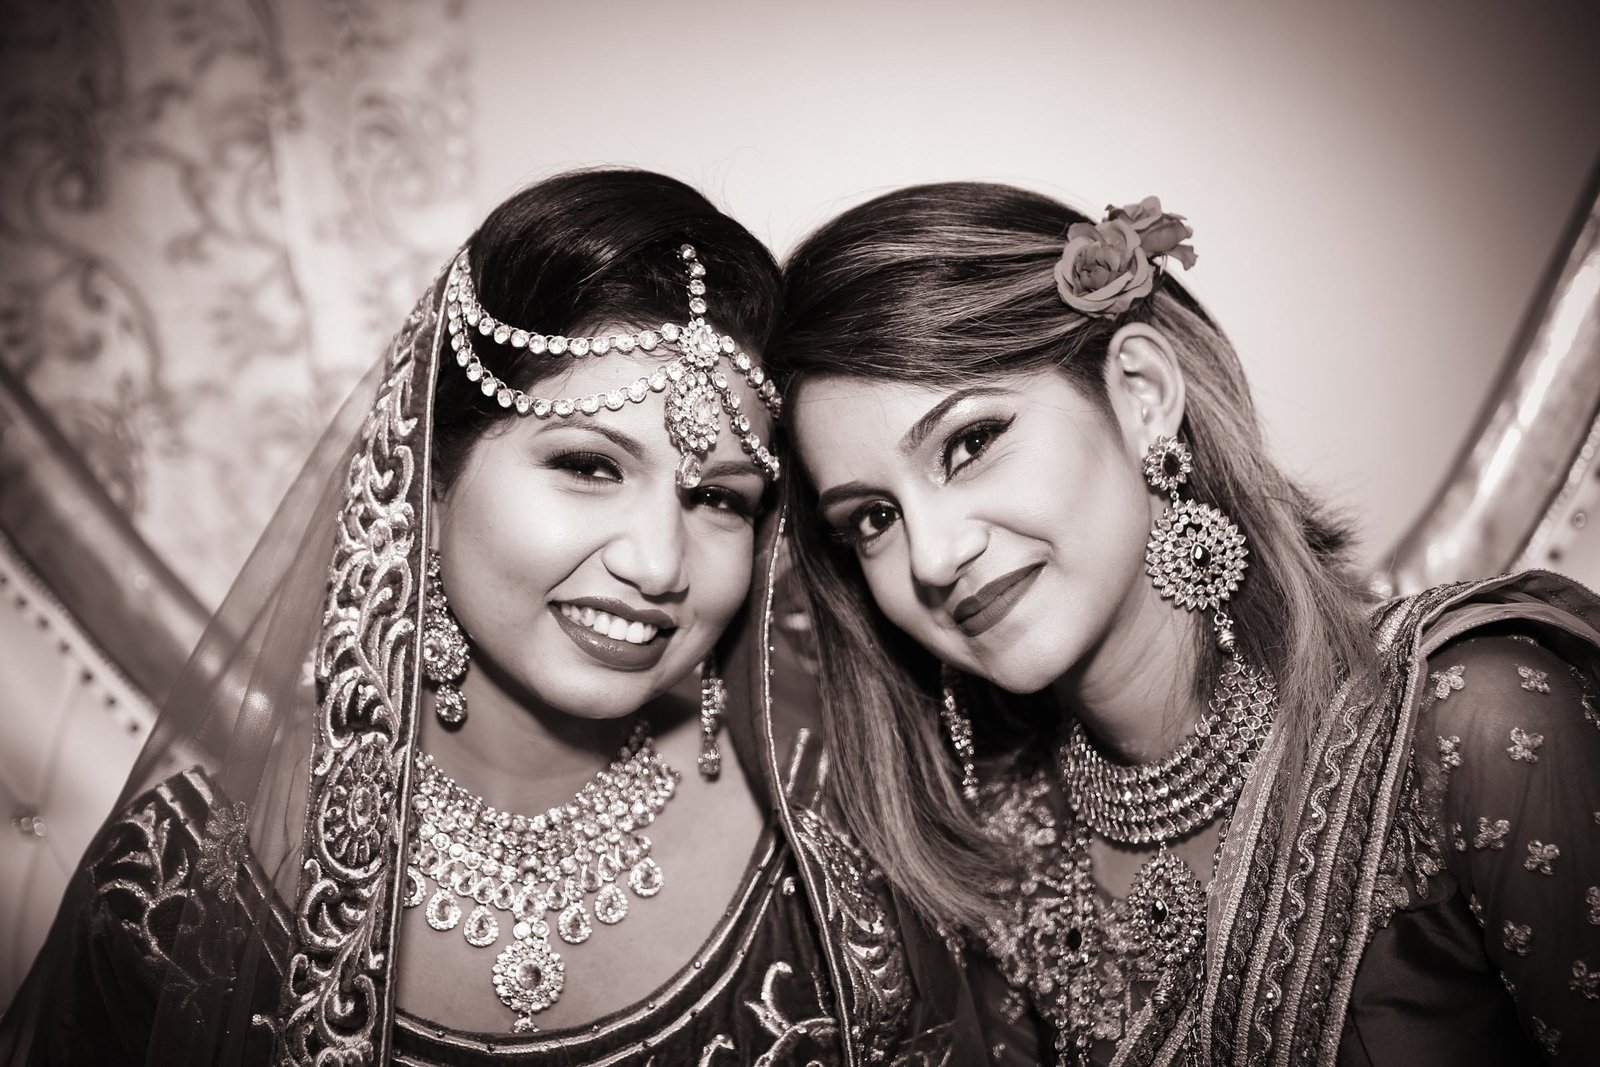 Sisters at Indian wedding in B+W. Photo by Ross Photography, Trinidad, W.I..